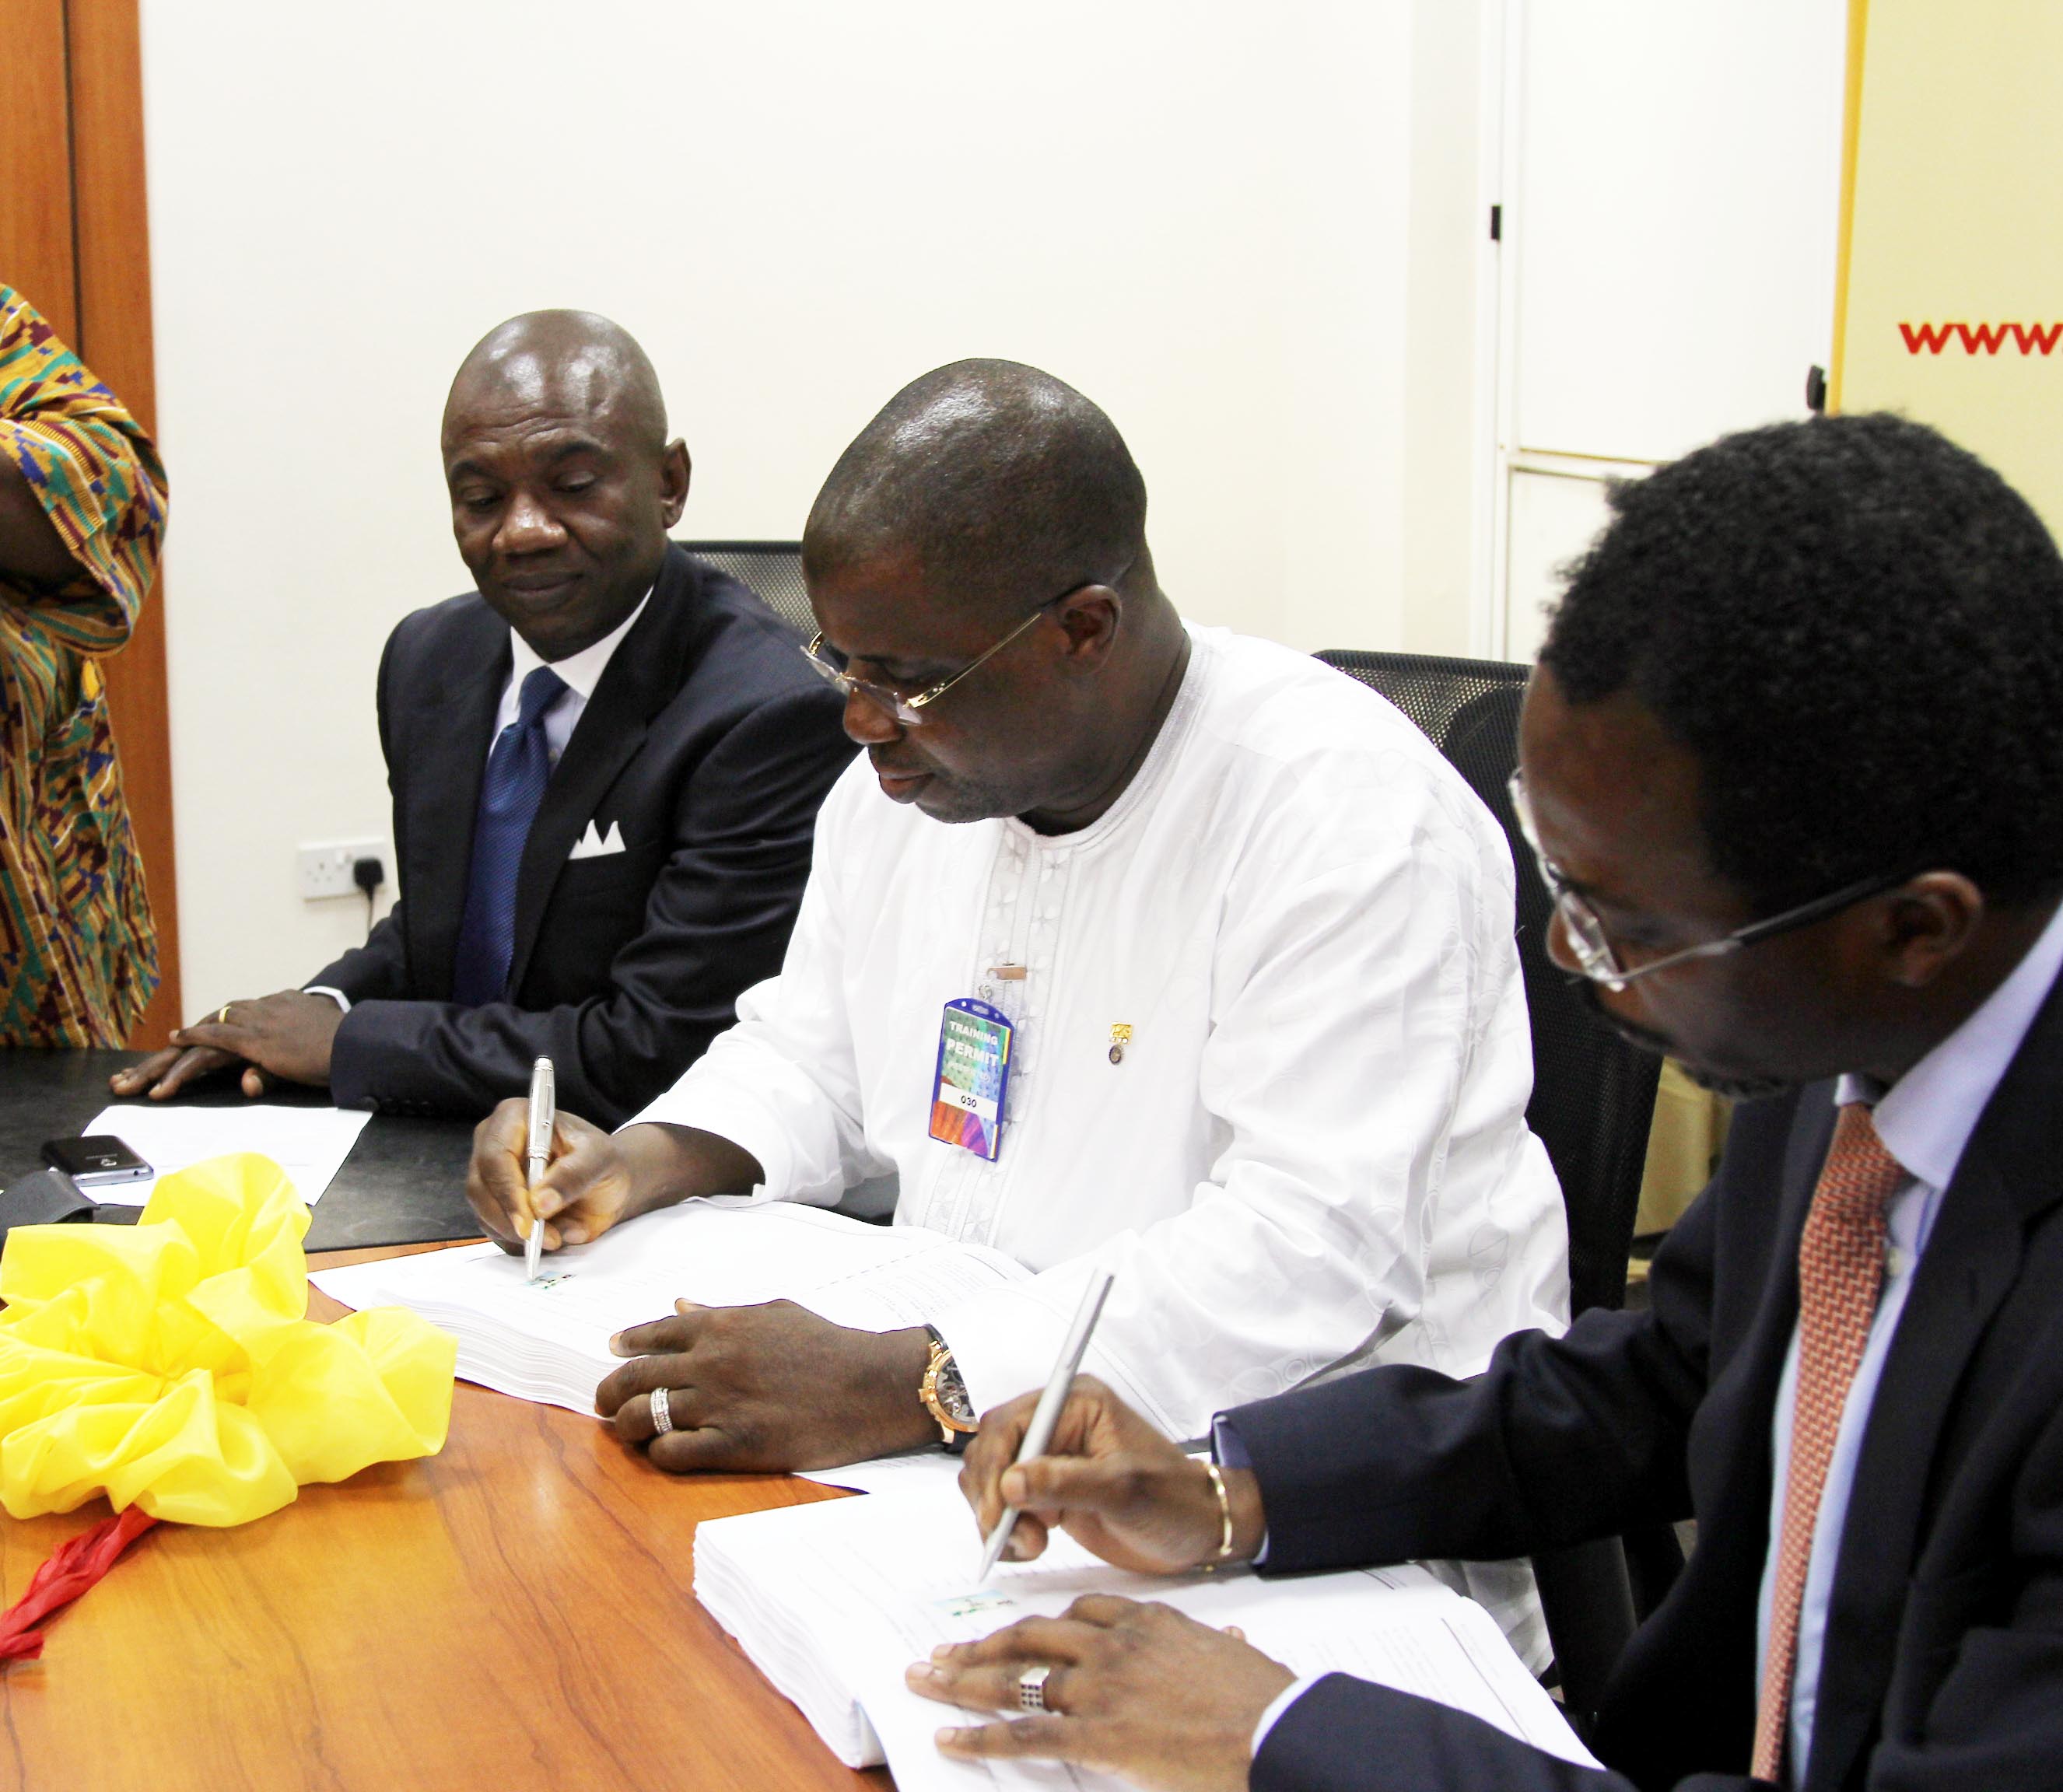 Signing of Package 1 of the EPC Trans-Niger Pipeline Loopline Project